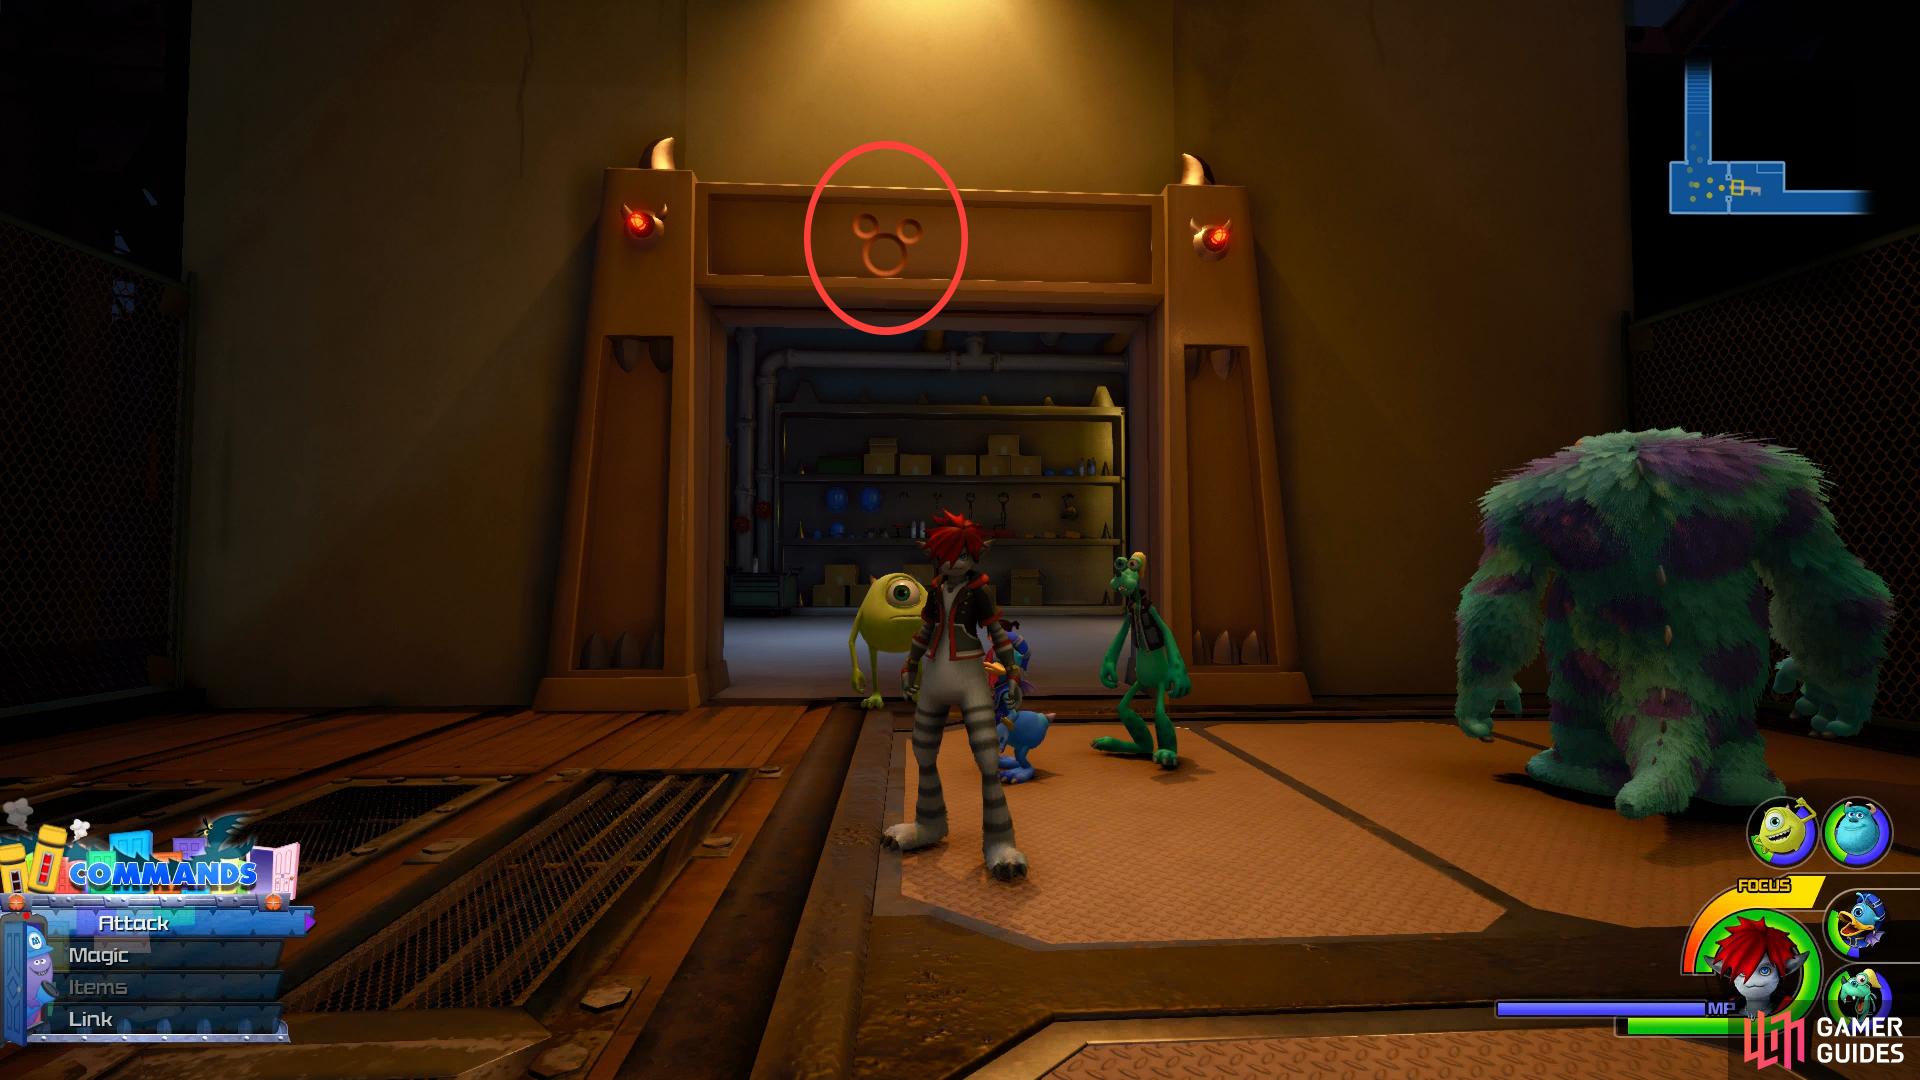 Look on the frame of this door to snap the Lucky Emblem.